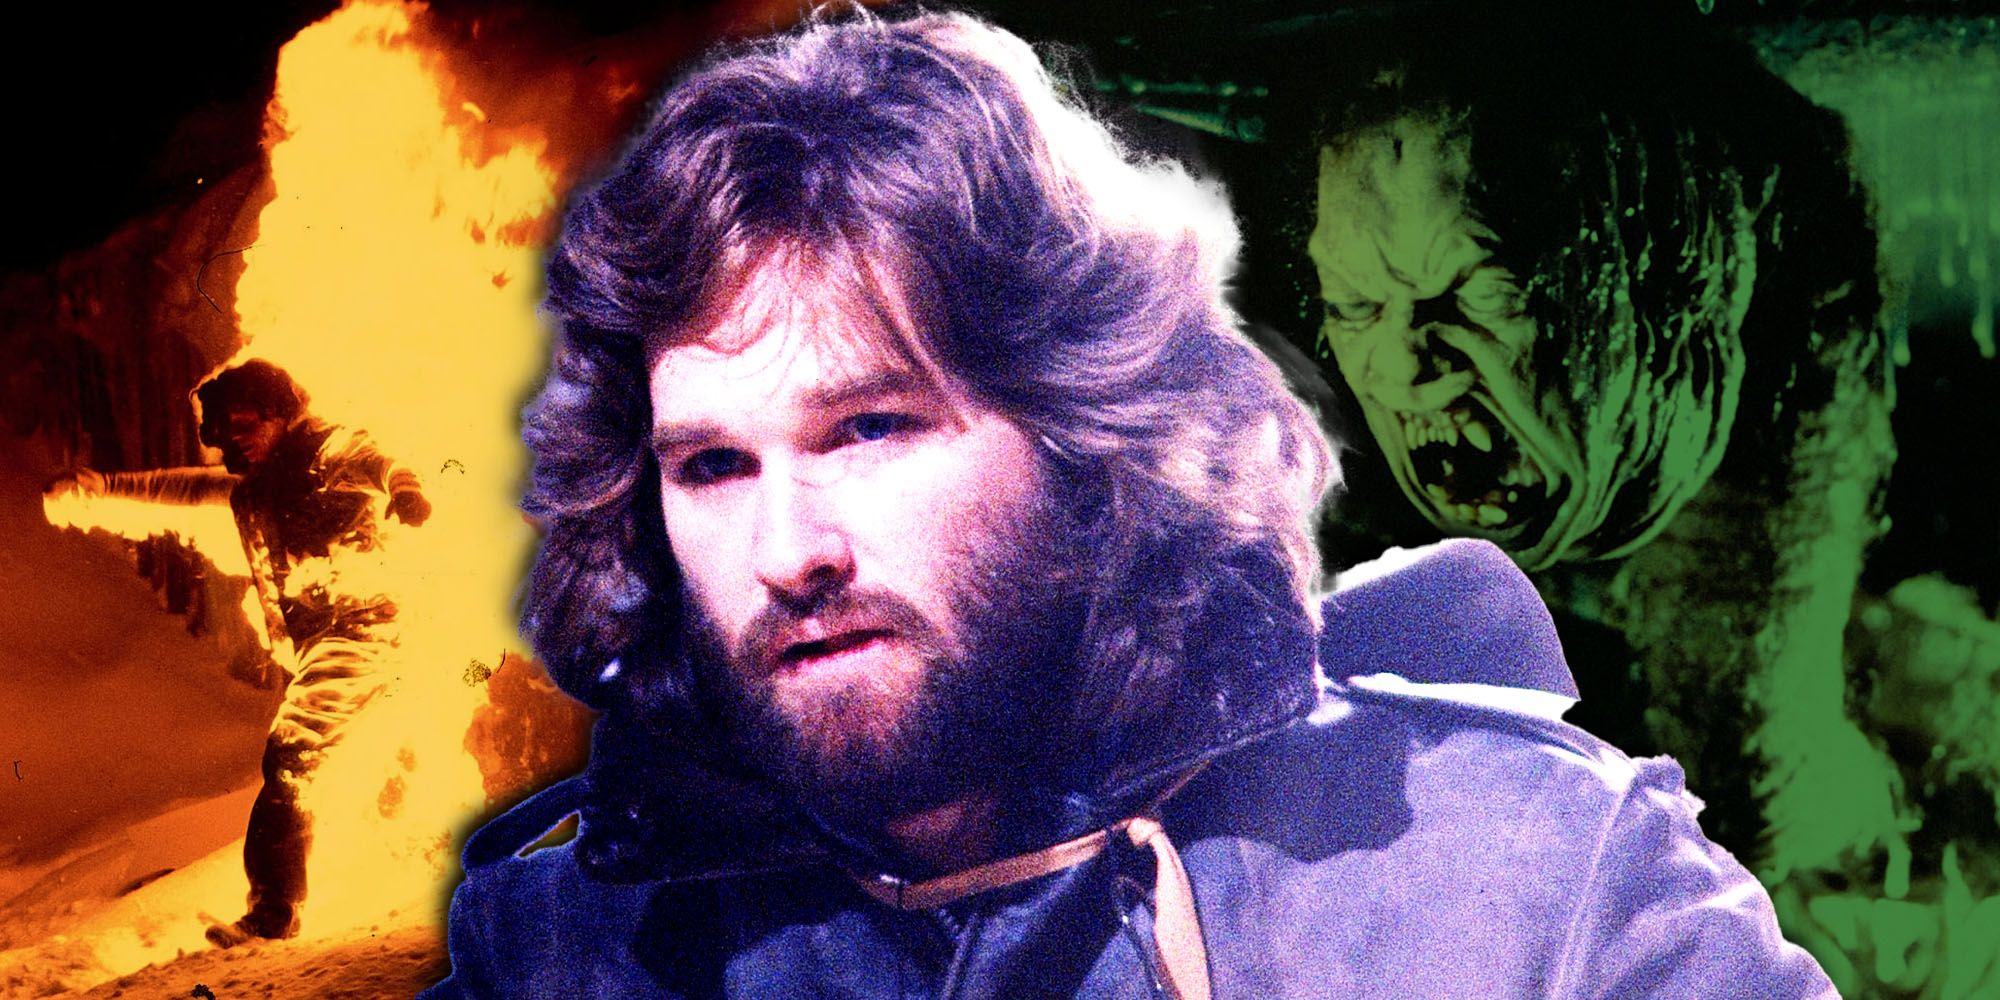 The Thing Director John Carpenter Has Message For Critics Who Gave Bad Reviews 41 Years Ago